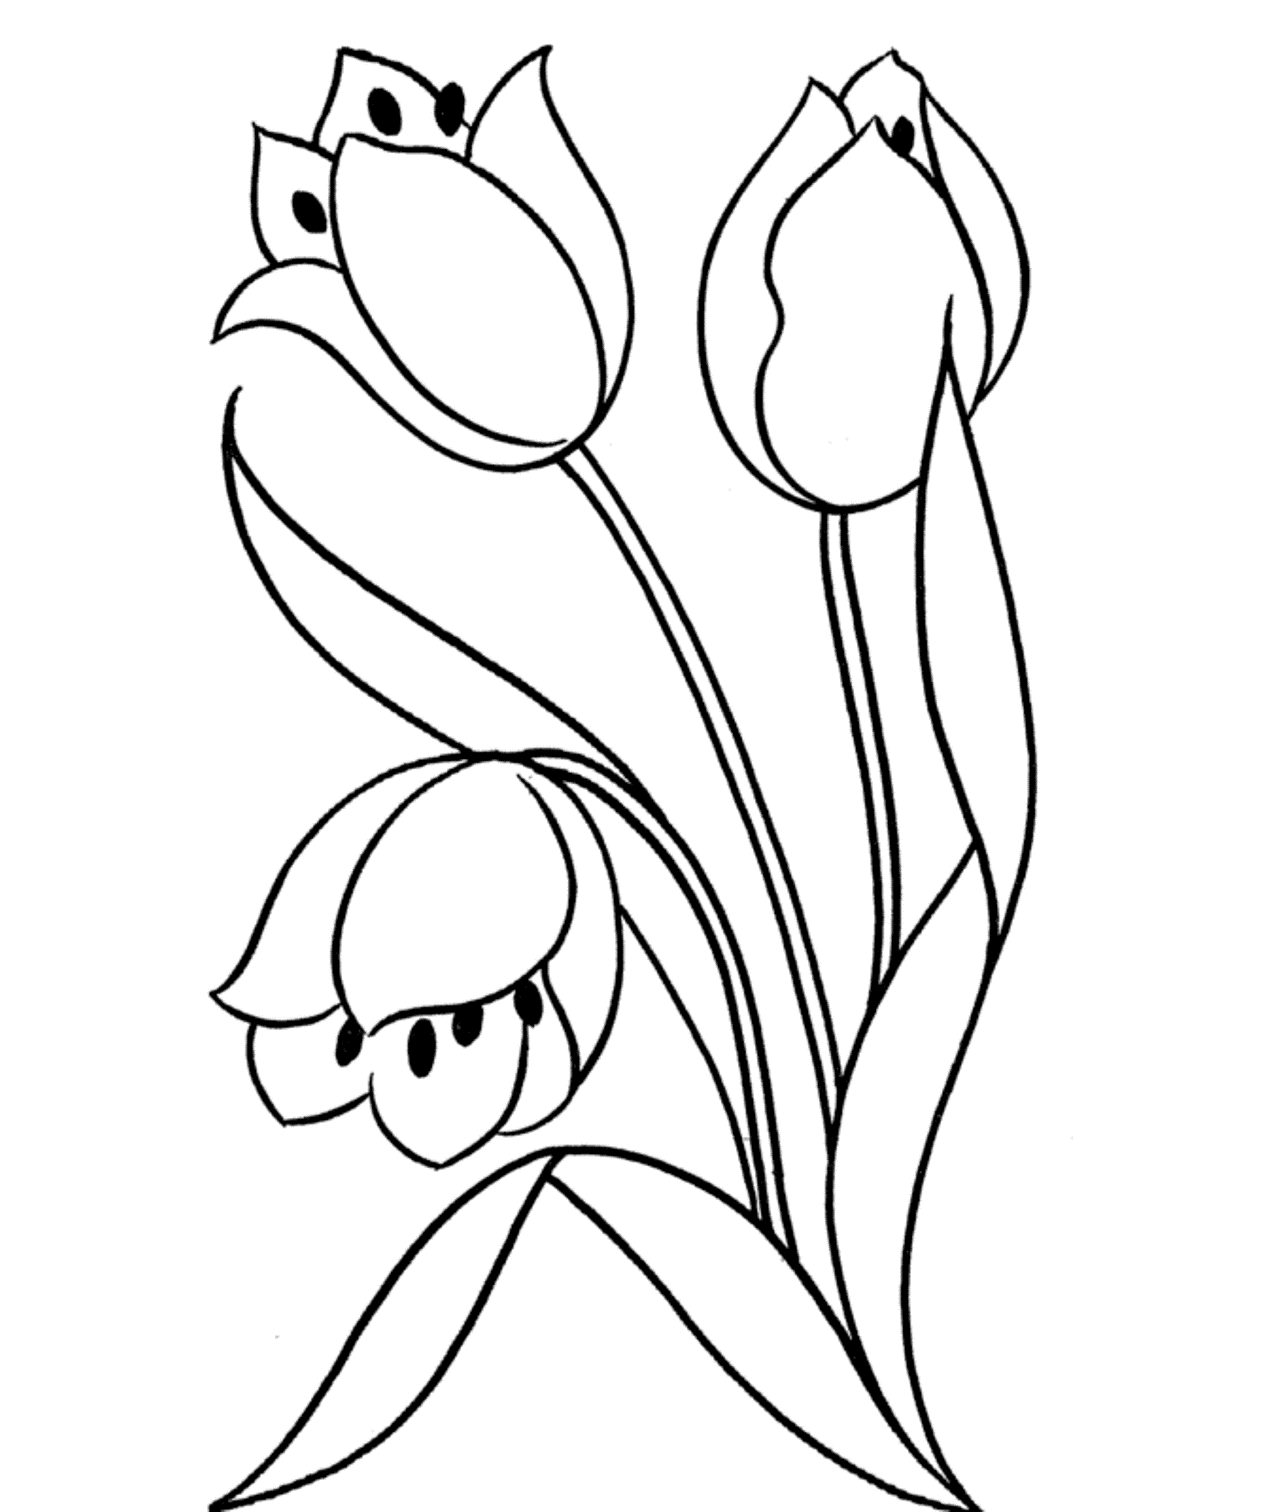 Awesome Flowers Coloring Page